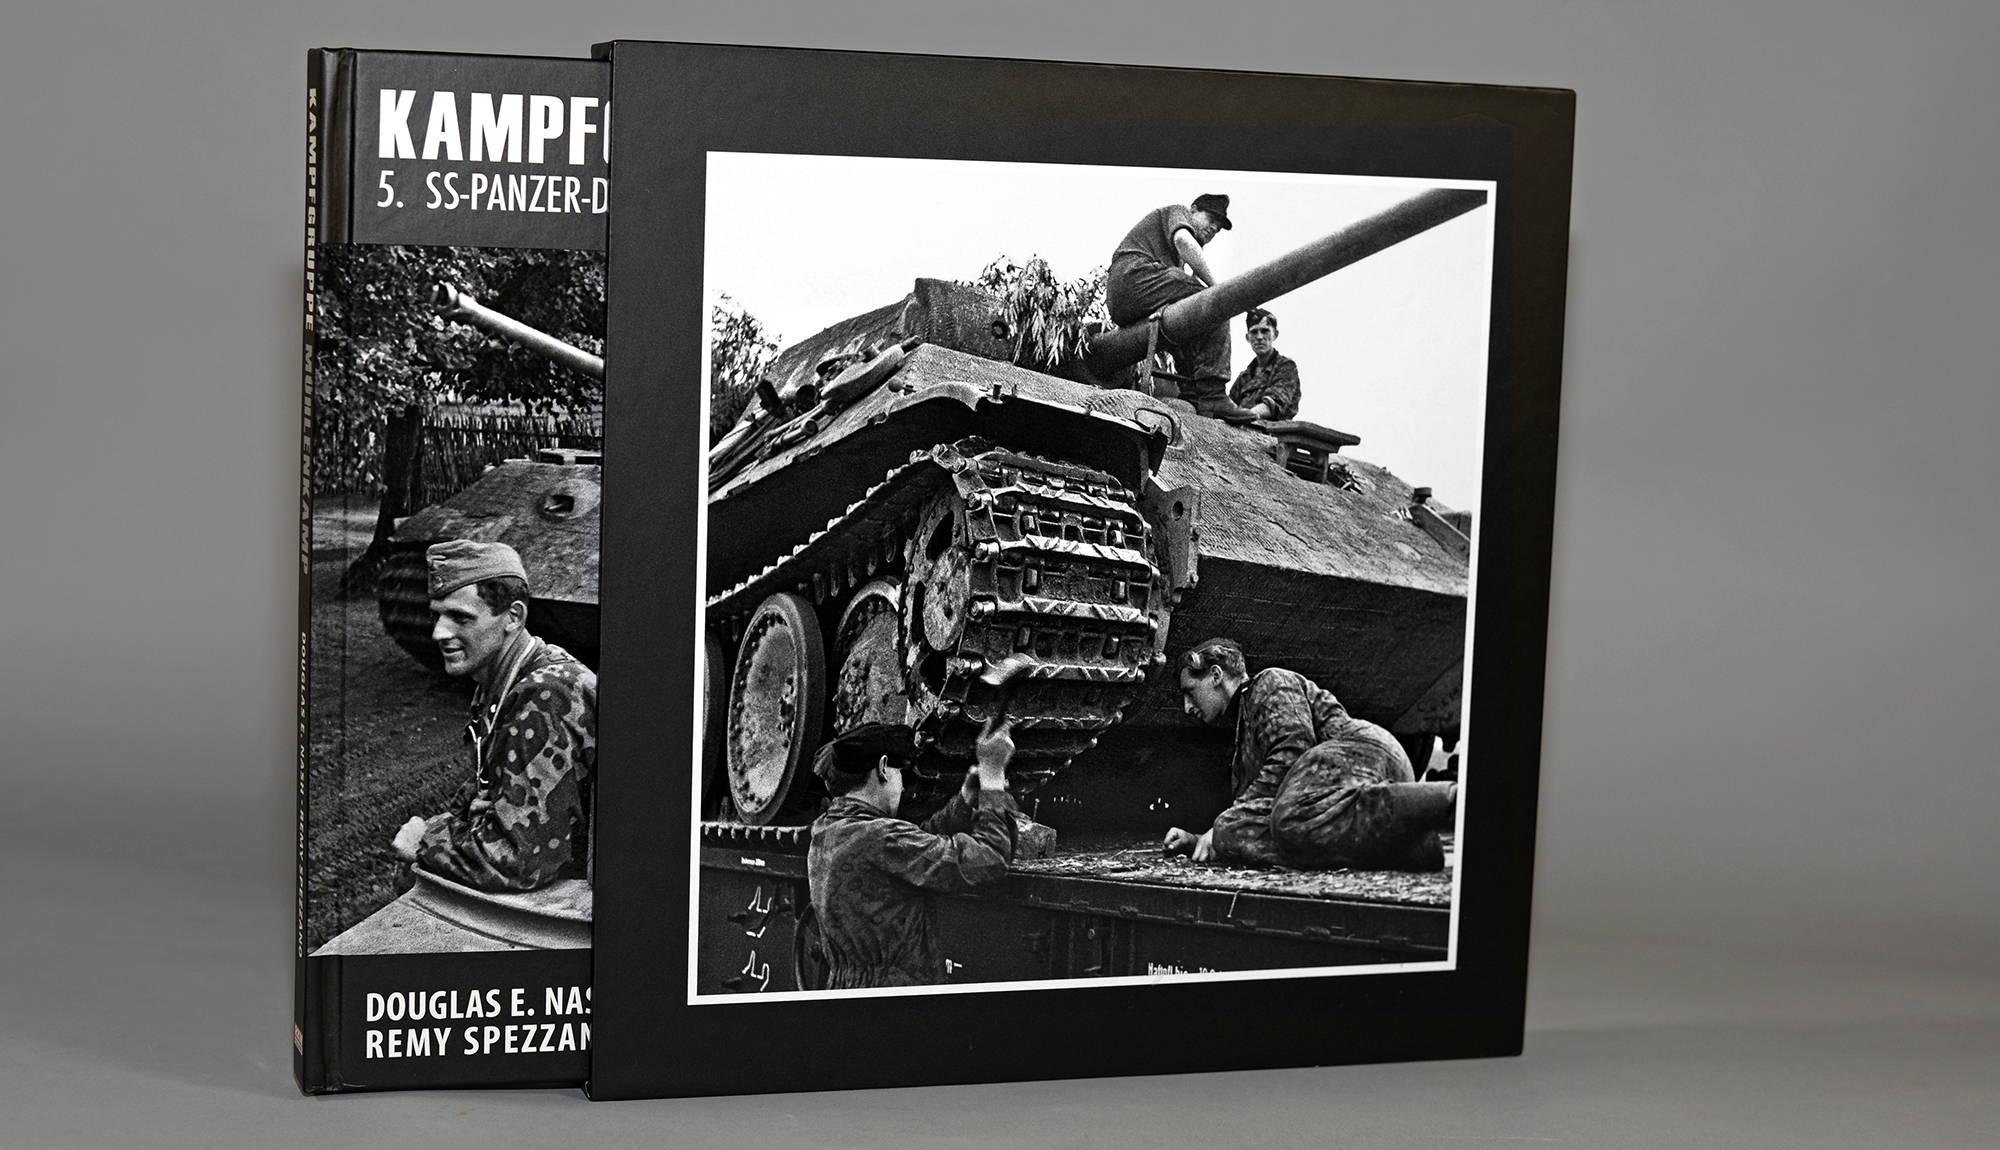 "KAMPFGRUPPE MÜHLENKAMP Signed and Numbered Edition with slipcase"